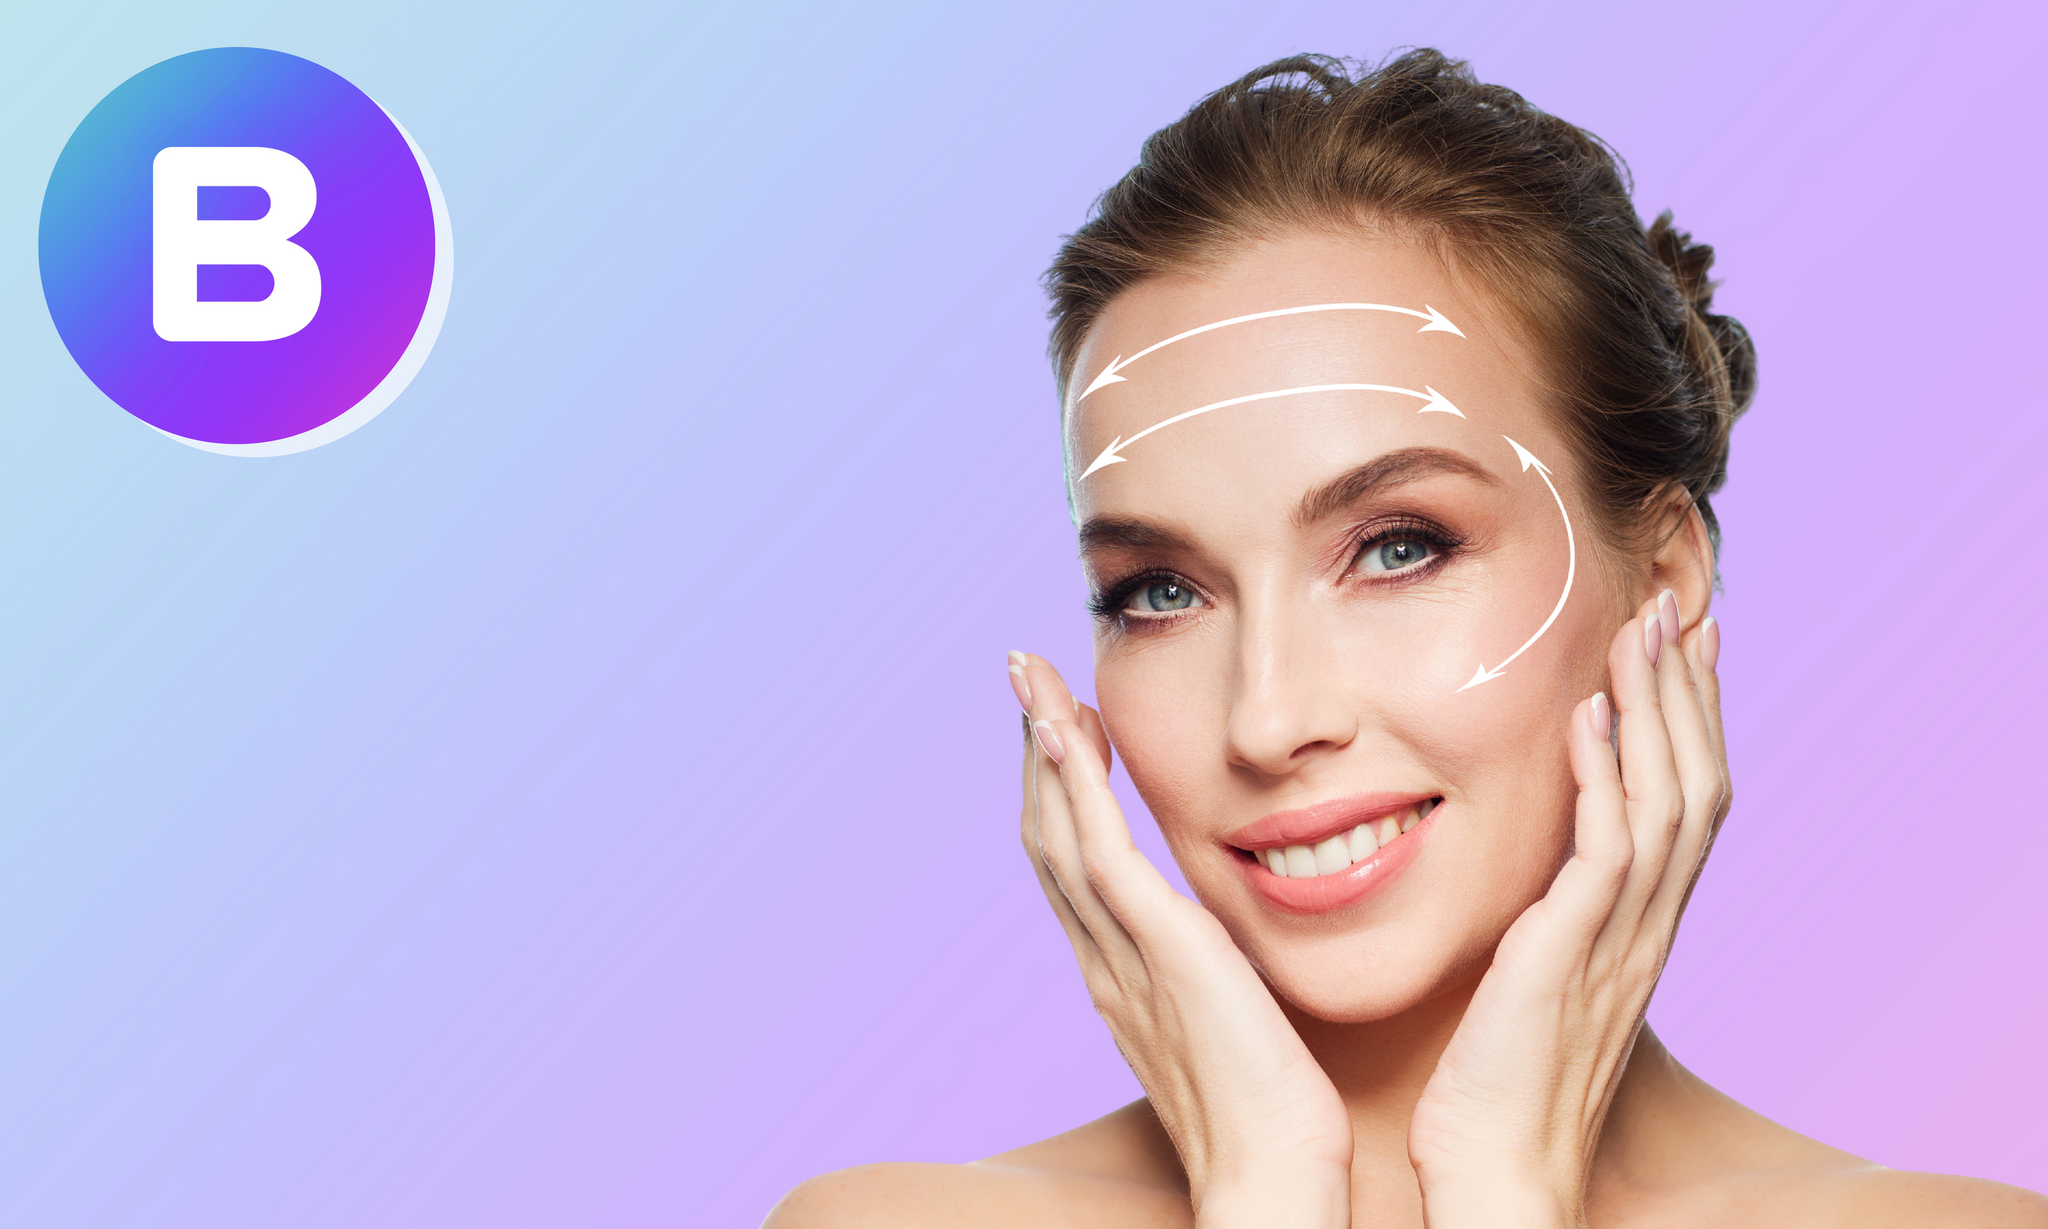 What is a Deep Plane Facelift?